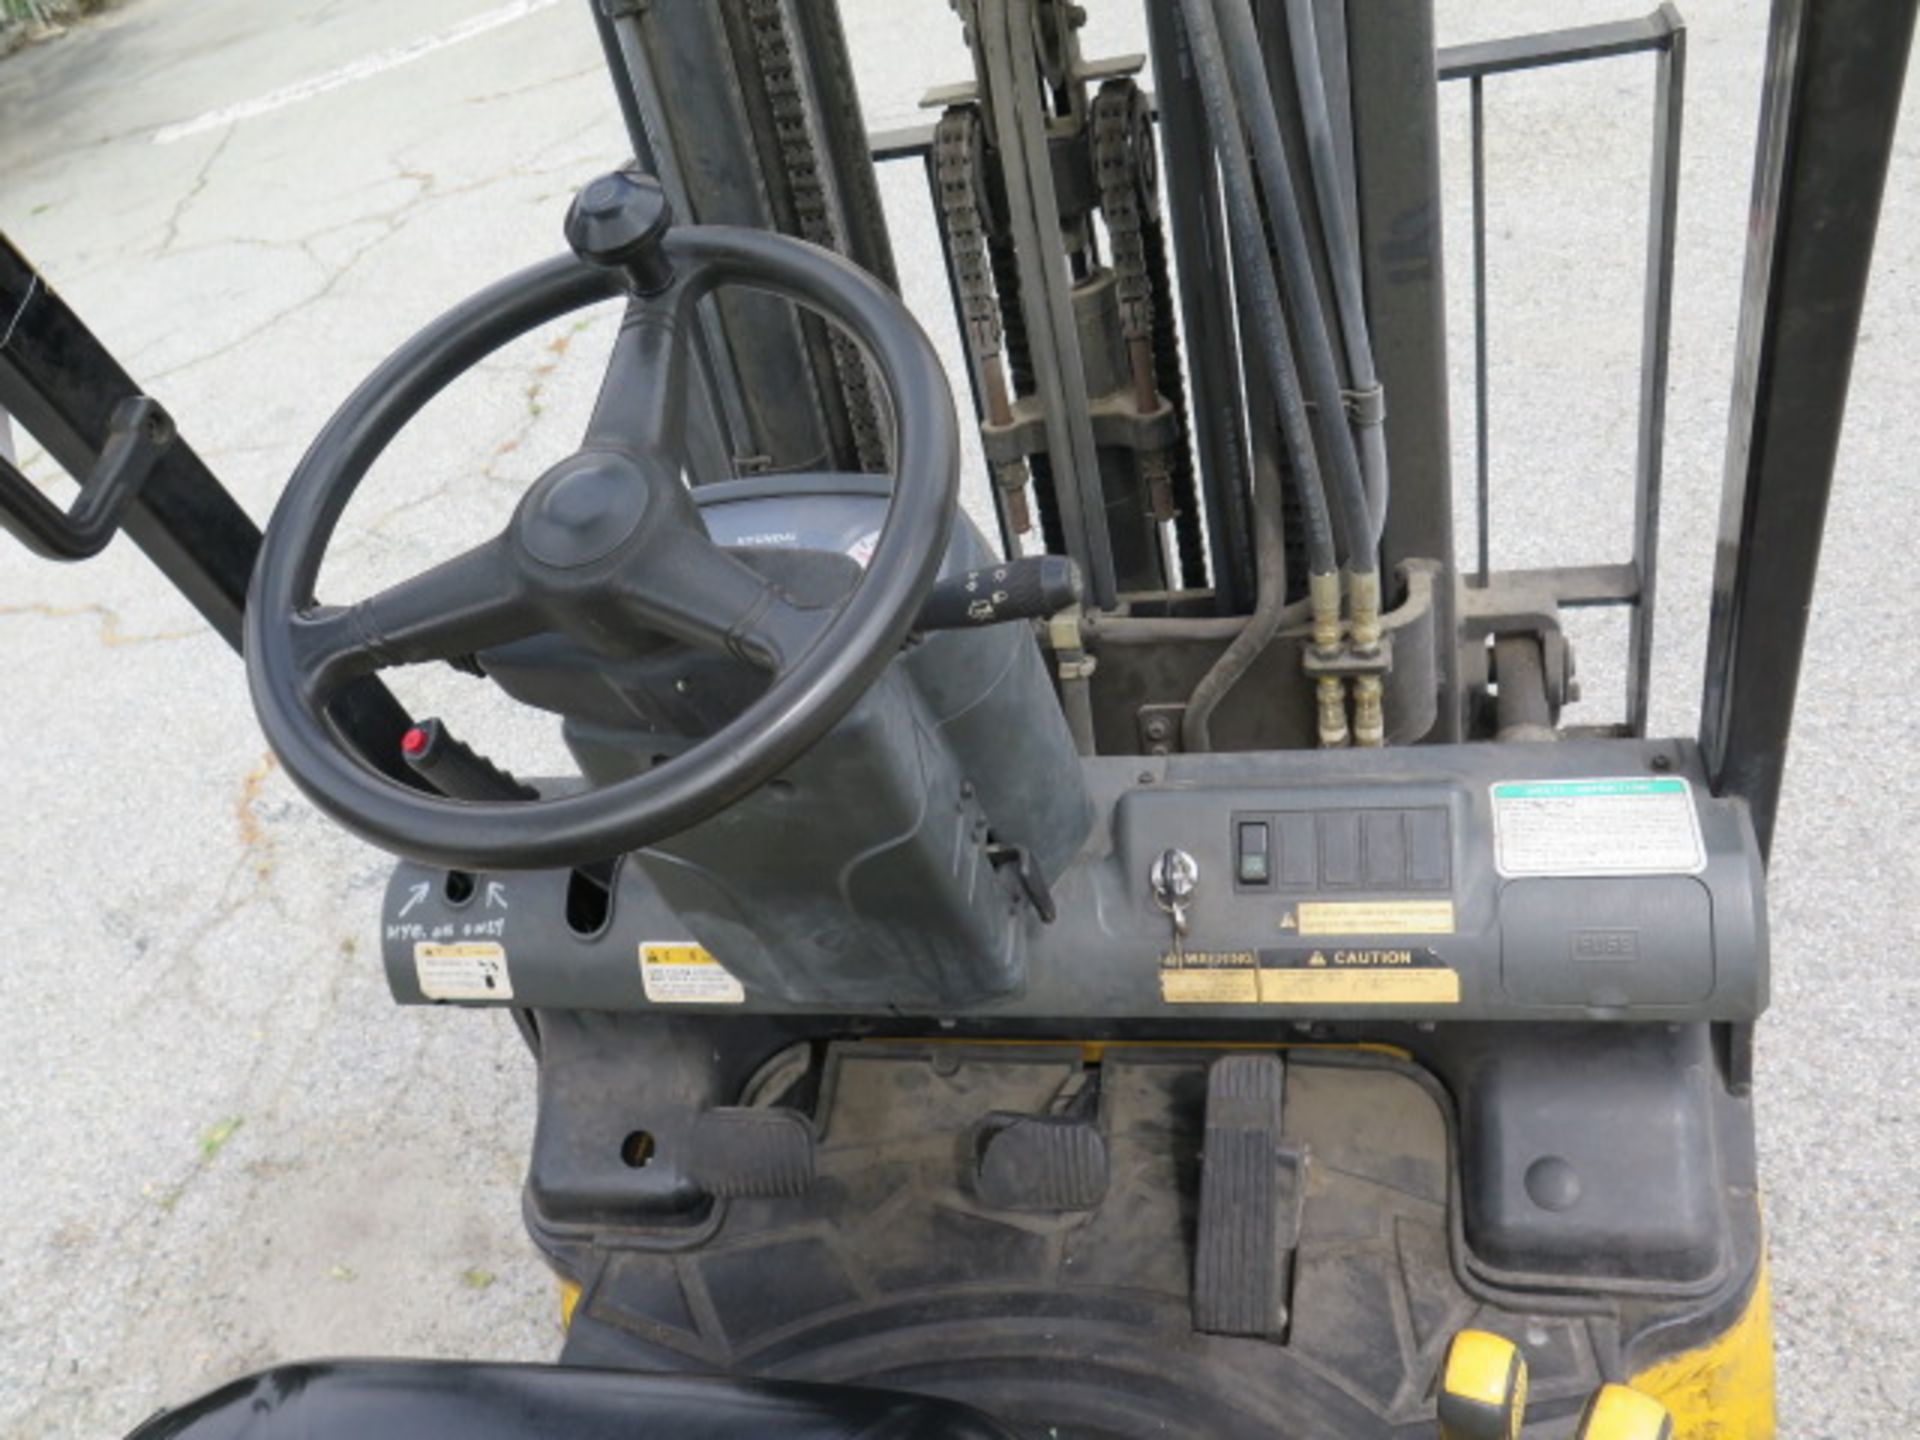 Hyundai 25LC-7 4680 Lb LPG Forklift s/n HC0210054 w/ 3-Stage, 185” Lift, Side Shift, SOLD AS IS - Bild 12 aus 19